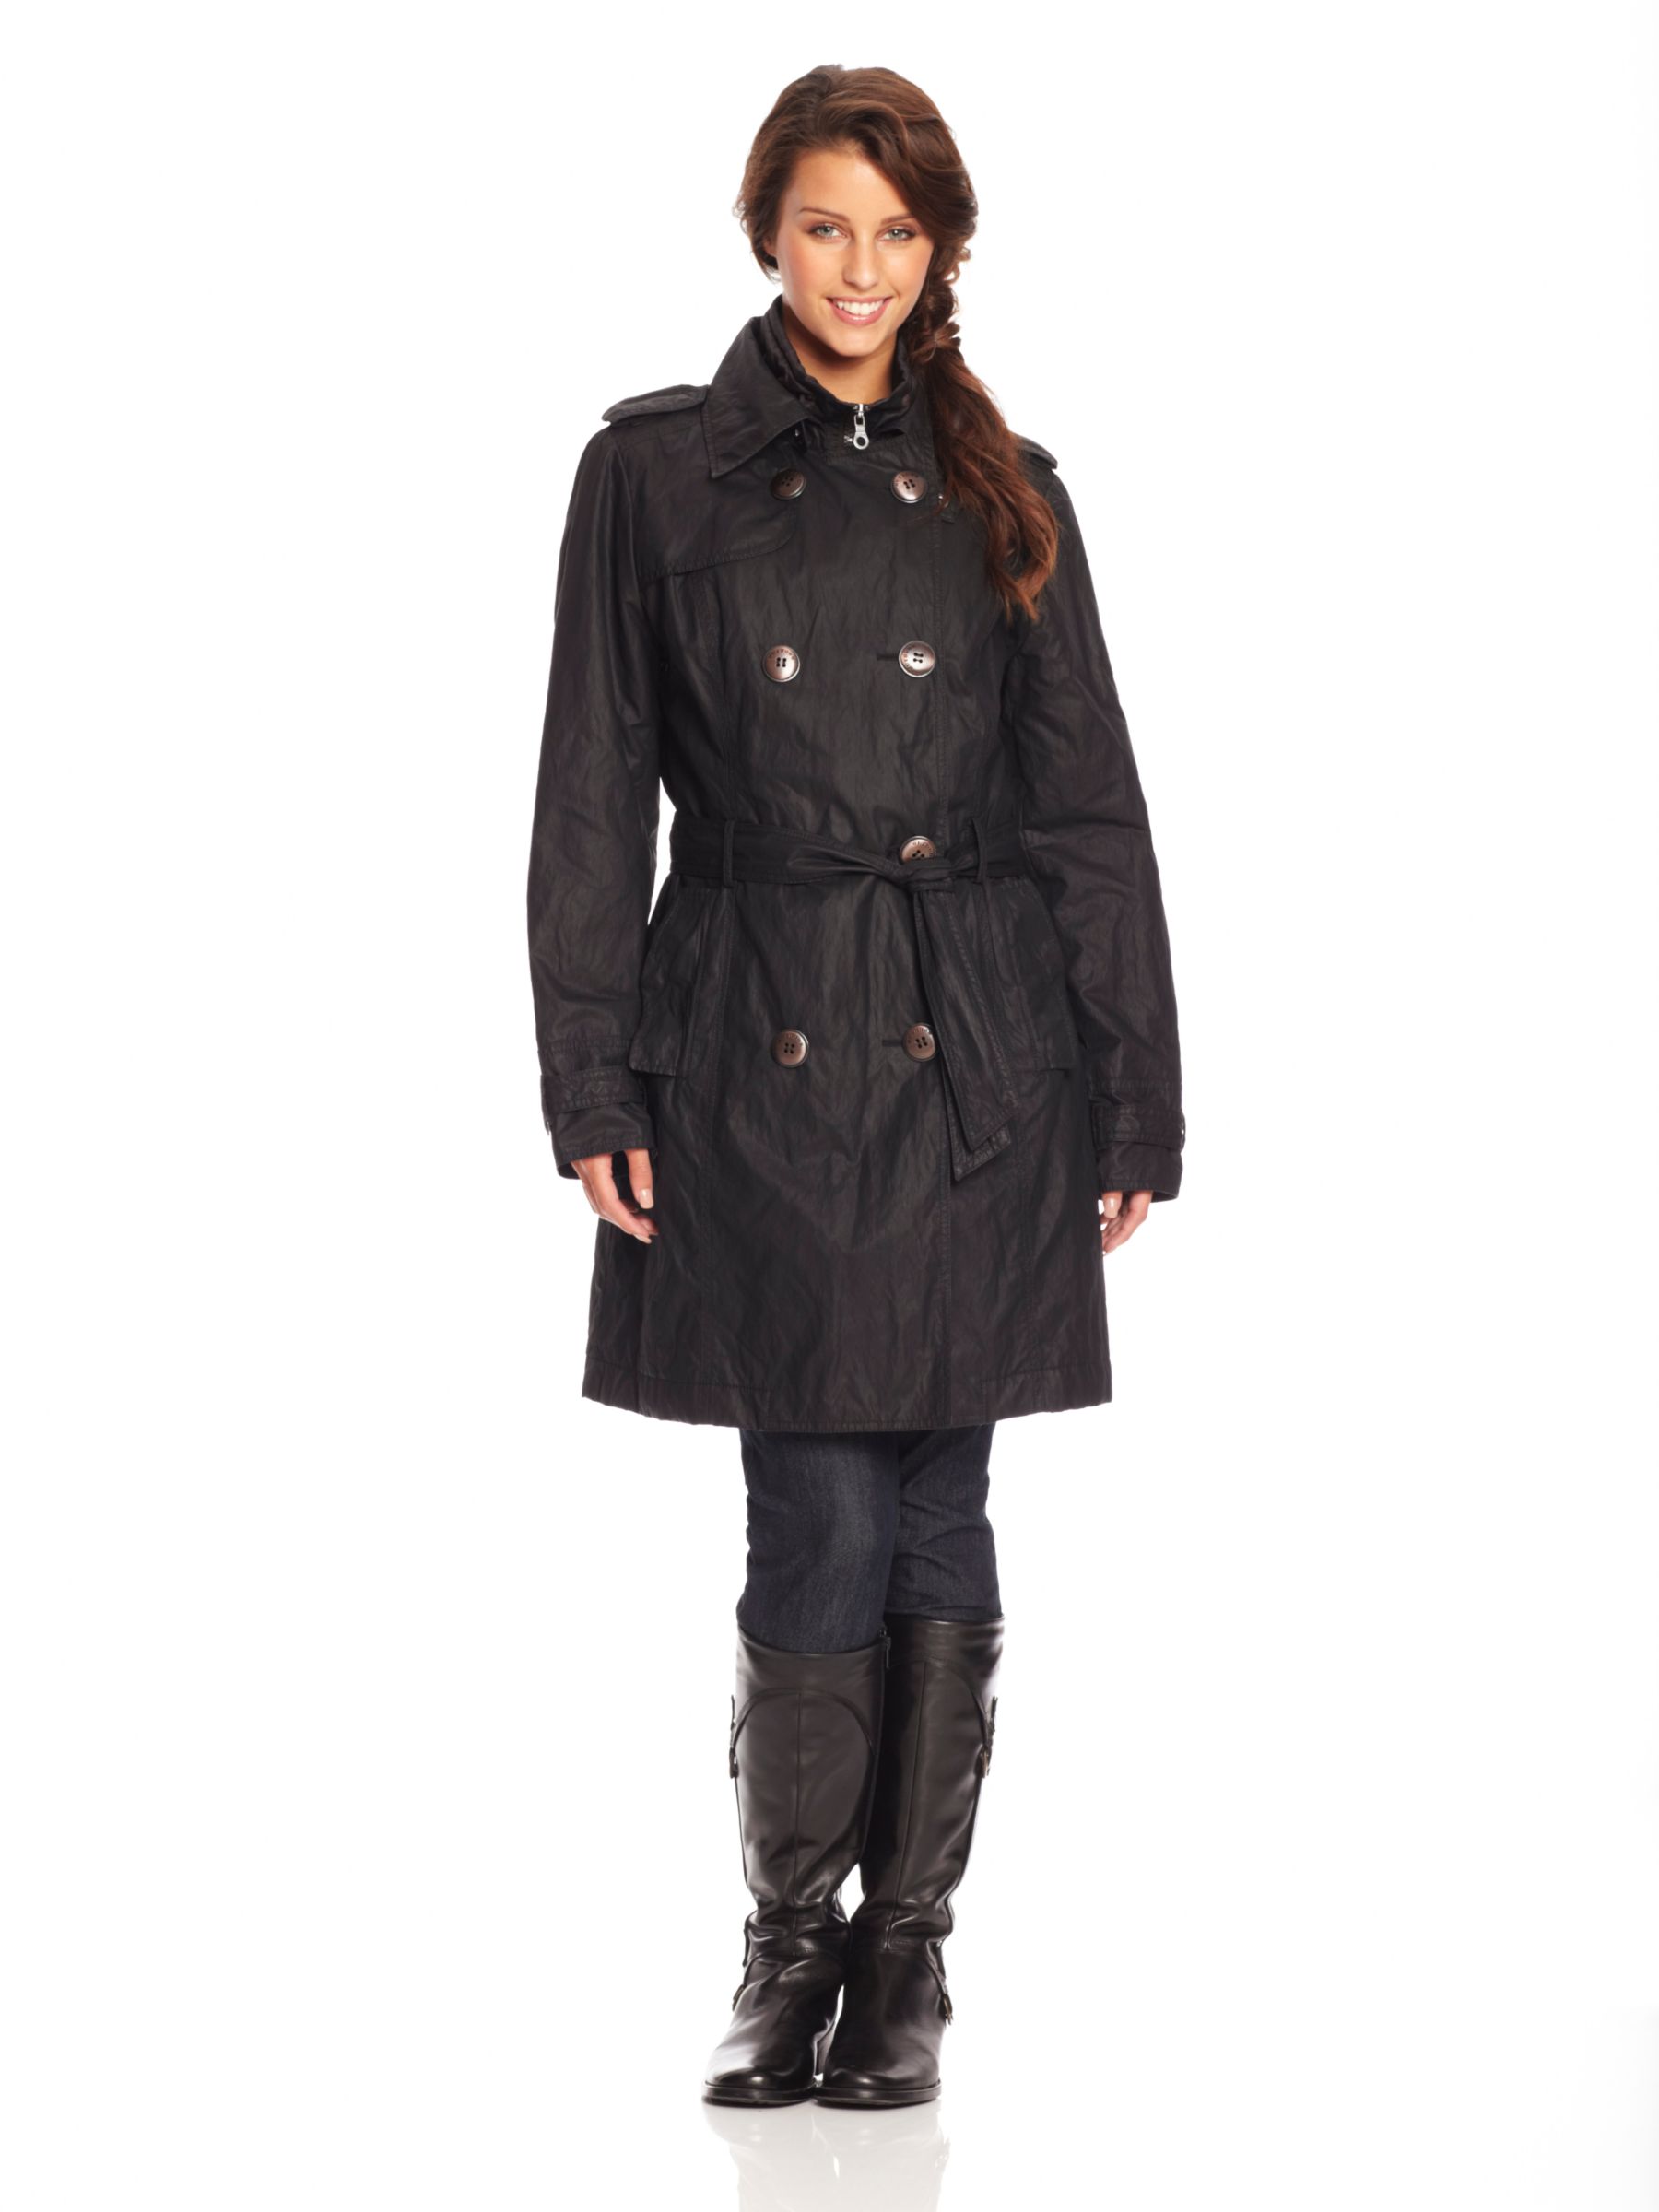 Betty Barclay Waxed Trench Coat, Black at JohnLewis